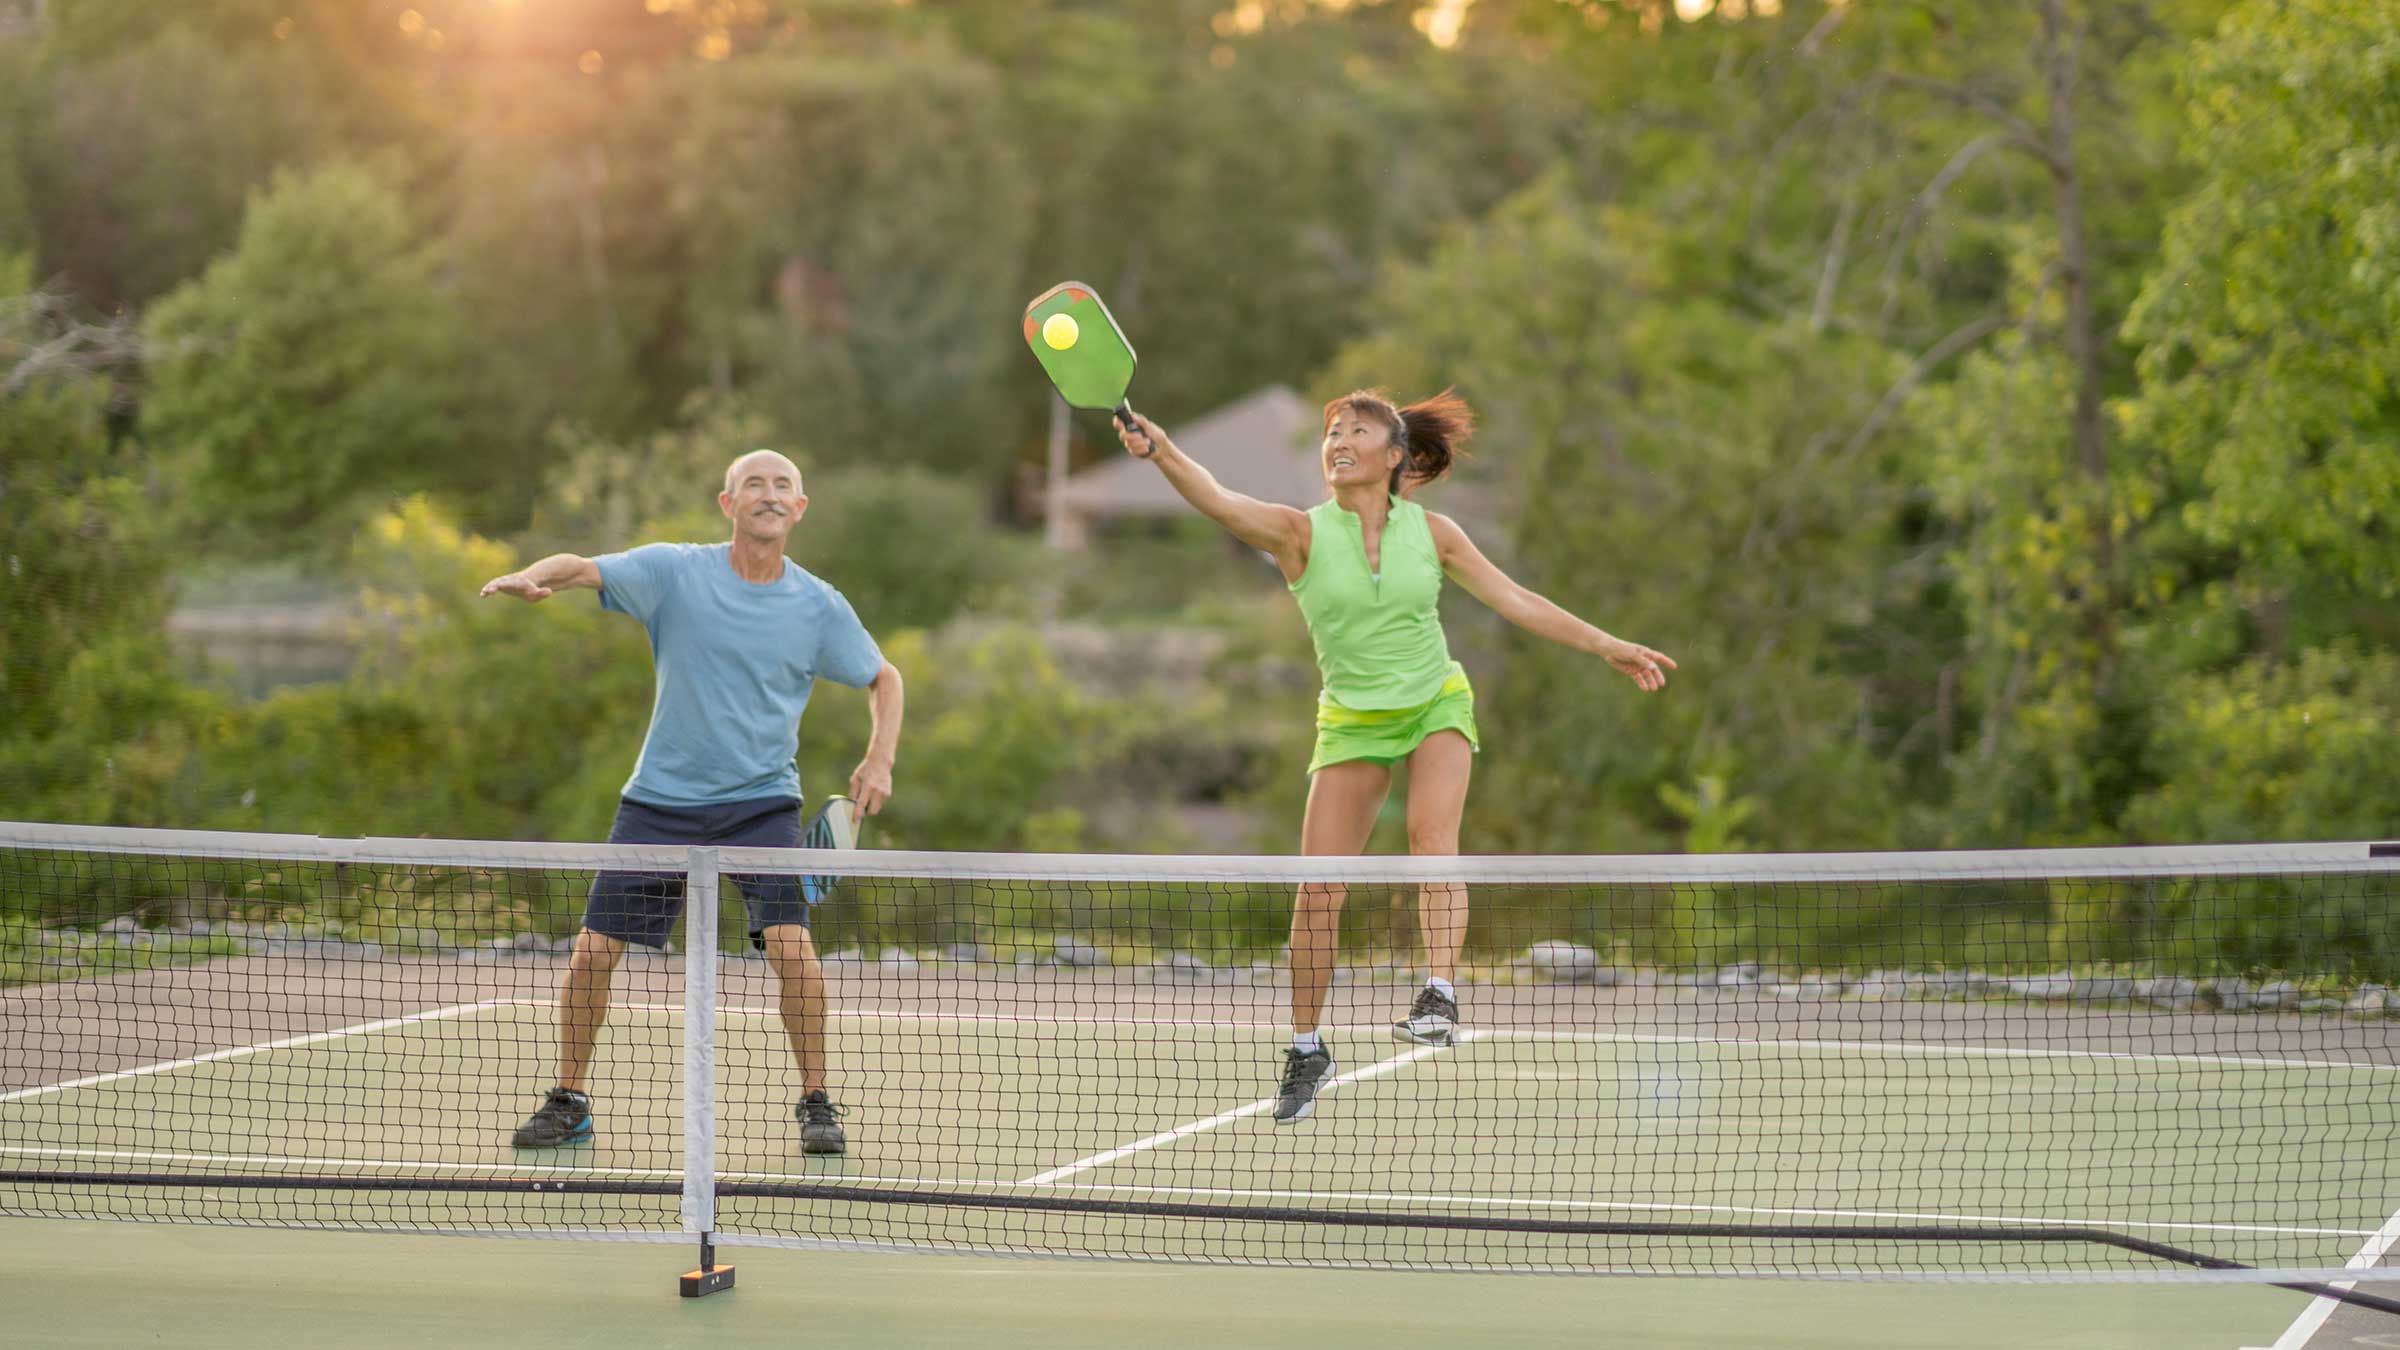 How to avoid common pickleball injuries, according to our sports medicine experts